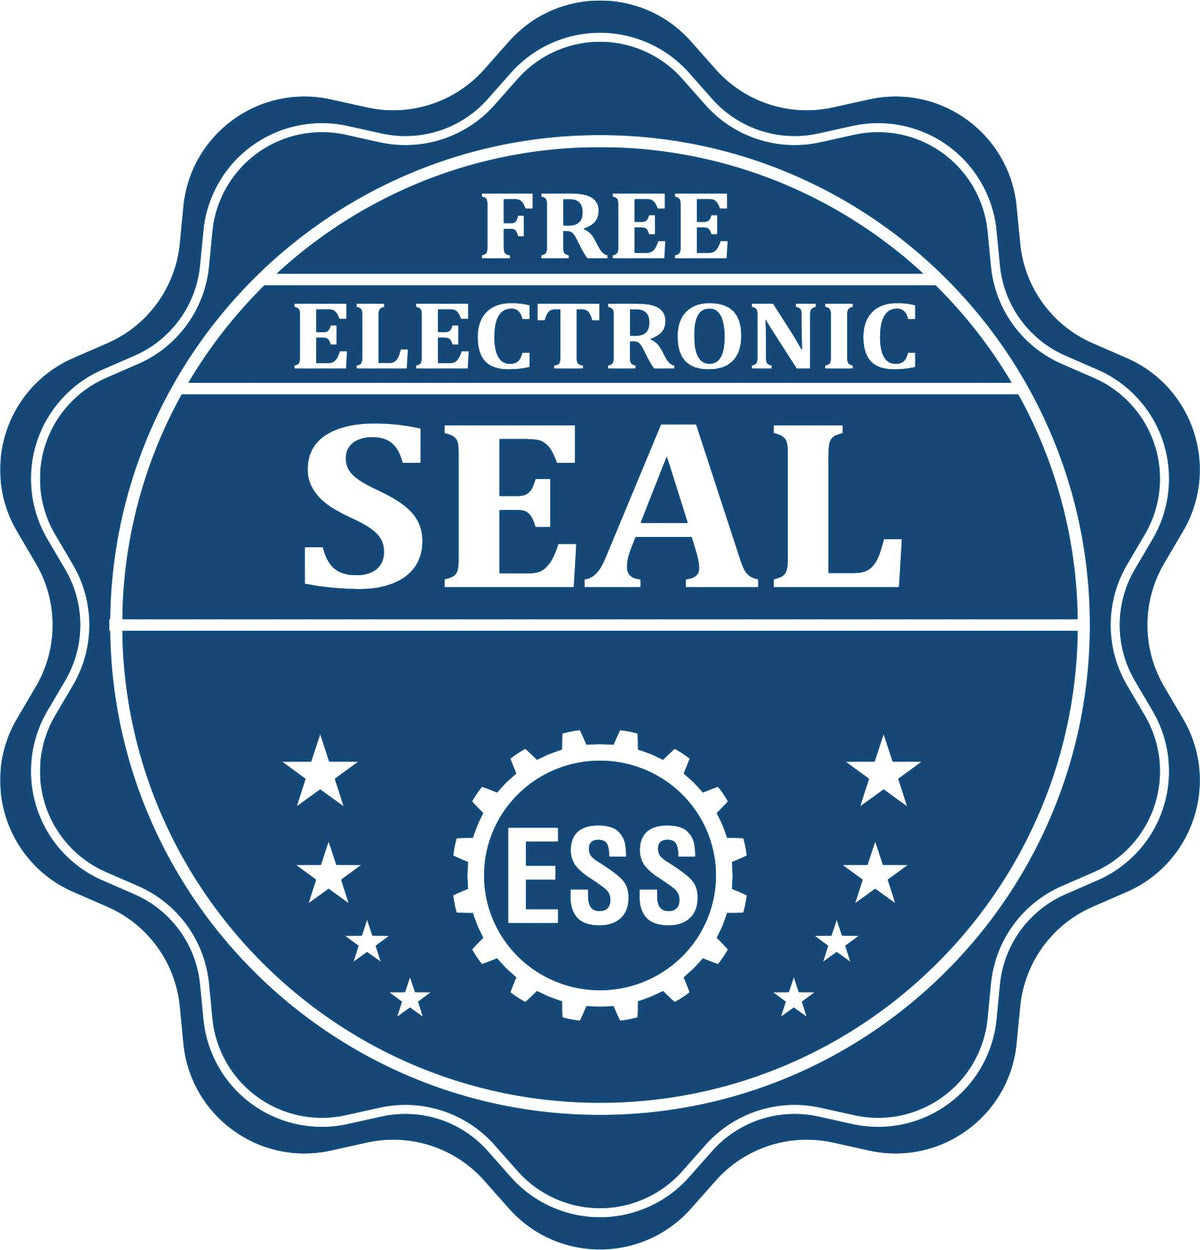 A badge showing a free electronic seal for the Soft Louisiana Professional Geologist Seal with stars and the ESS gear on the emblem.